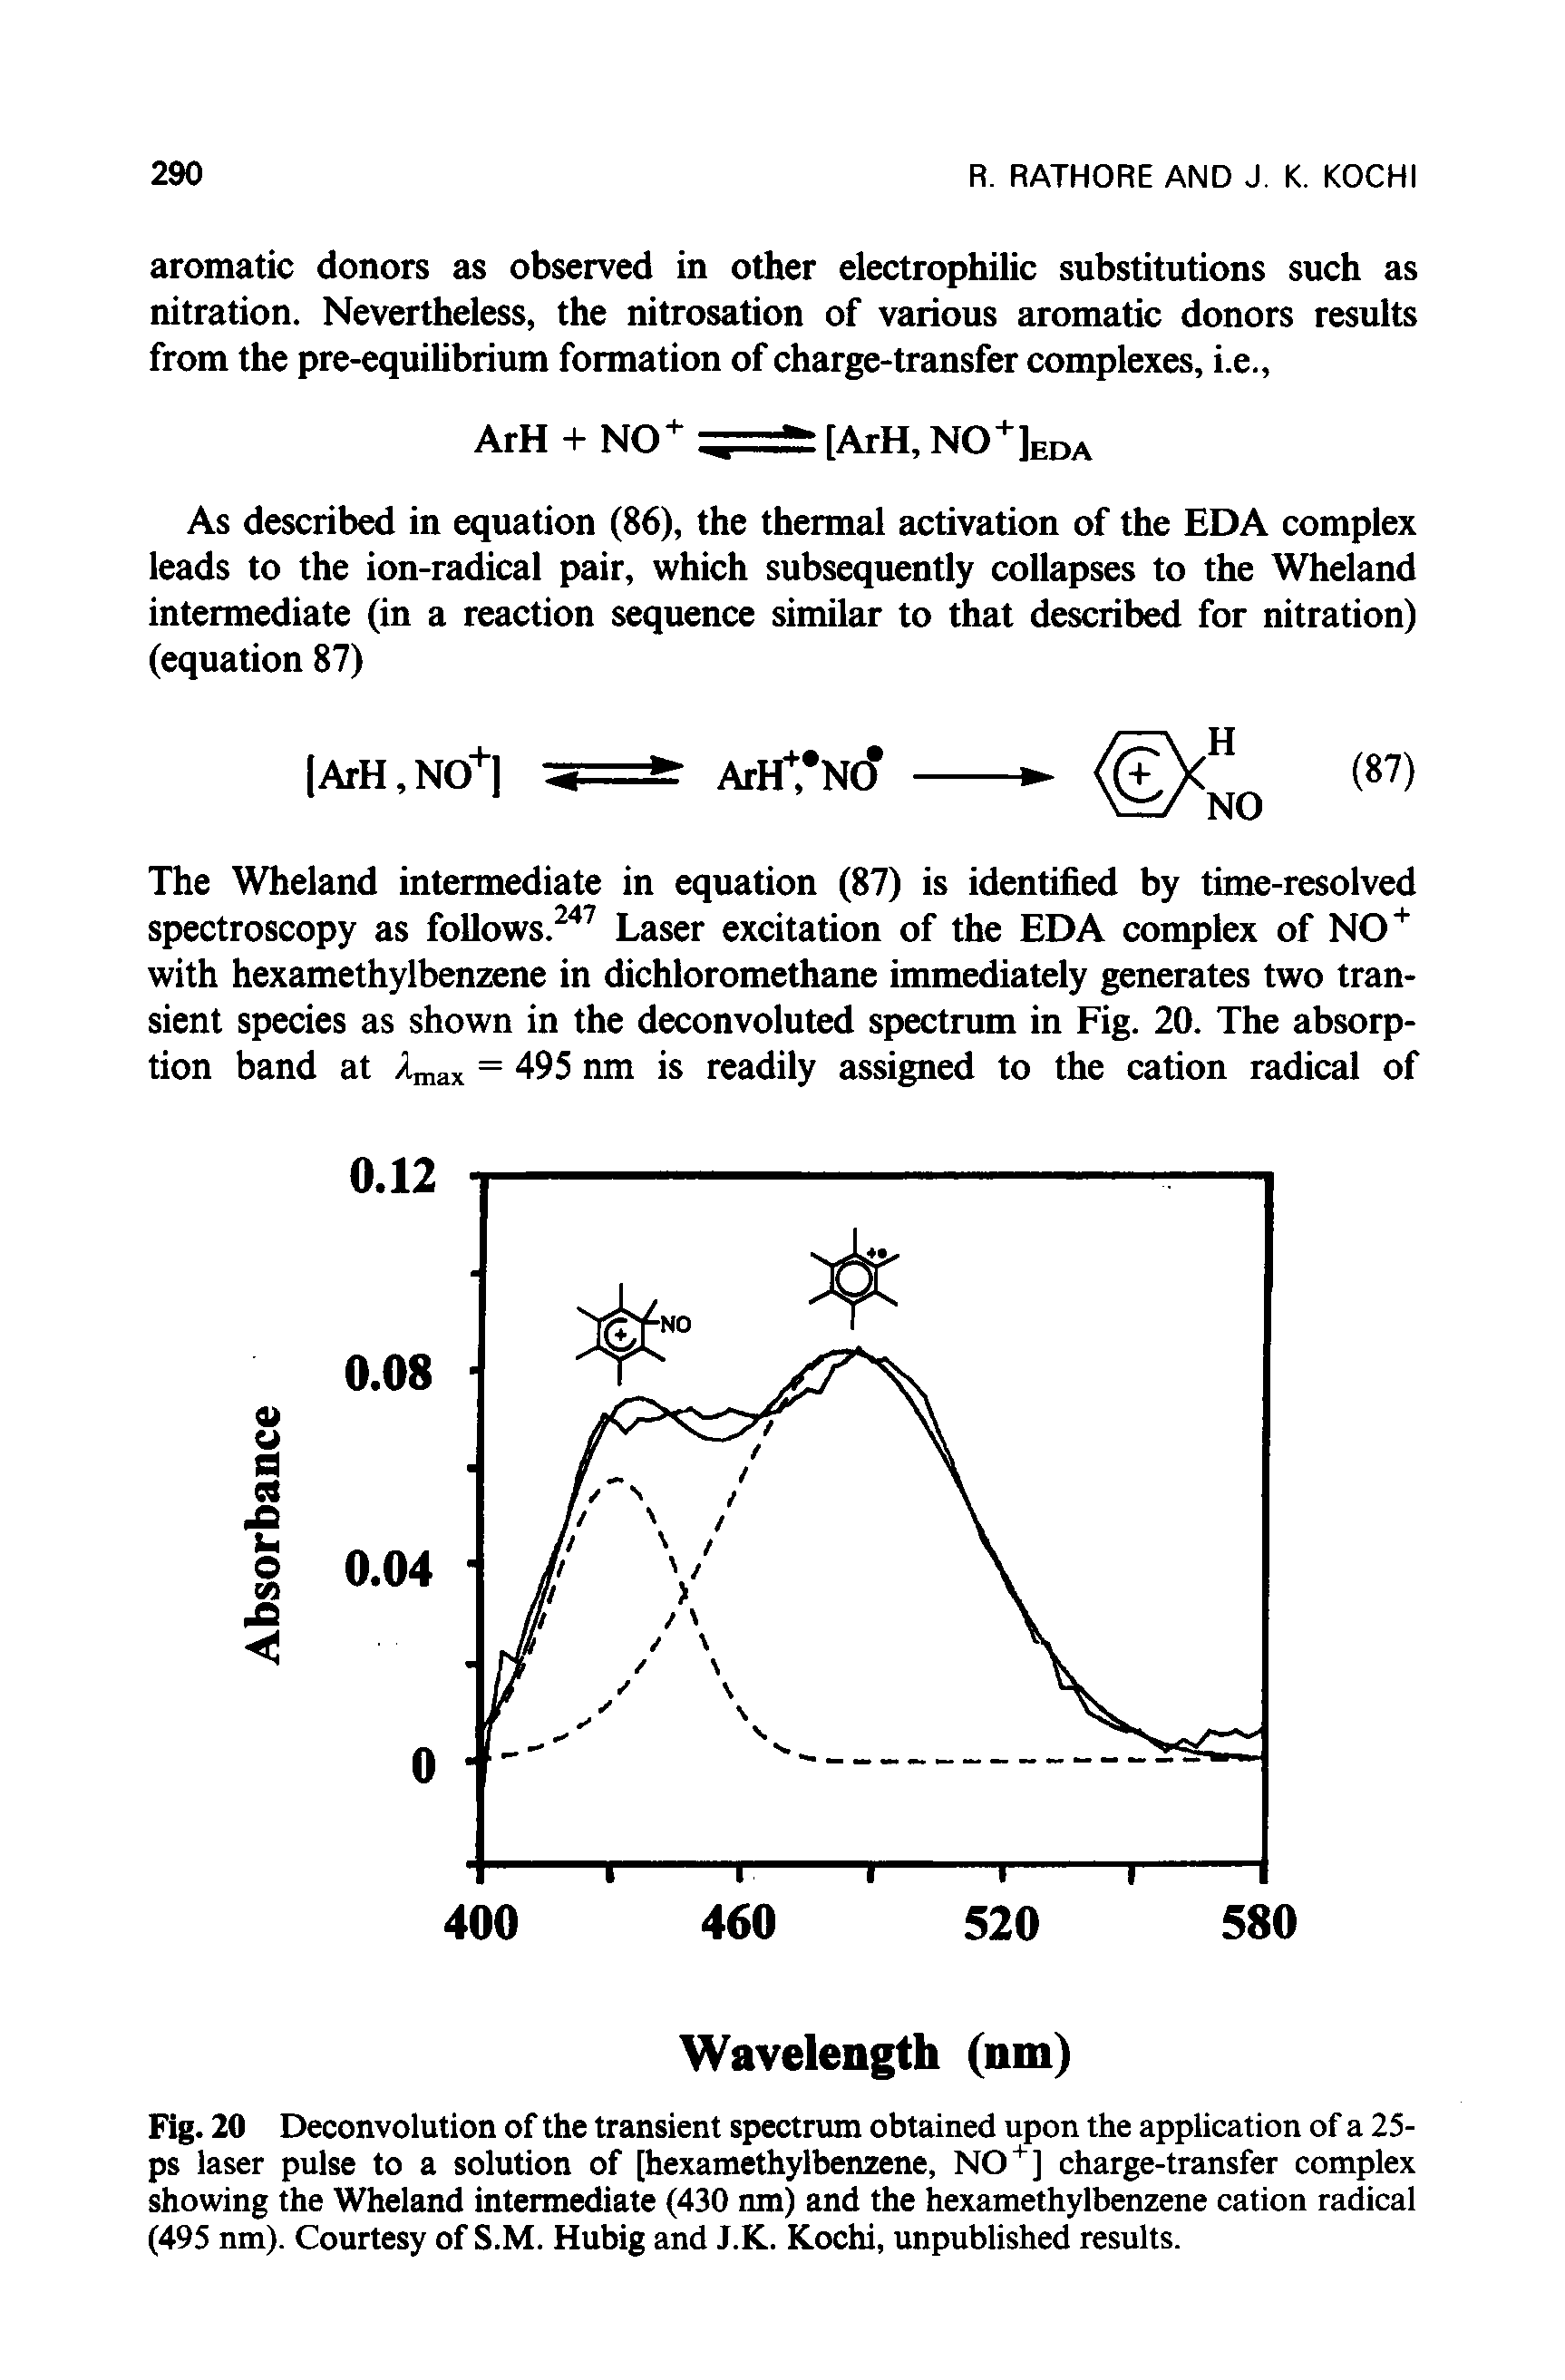 Fig. 20 Deconvolution of the transient spectrum obtained upon the application of a 25-ps laser pulse to a solution of [hexamethylbenzene, NO+] charge-transfer complex showing the Wheland intermediate (430 nm) and the hexamethylbenzene cation radical (495 nm). Courtesy of S.M. Hubig and J.K. Kochi, unpublished results.